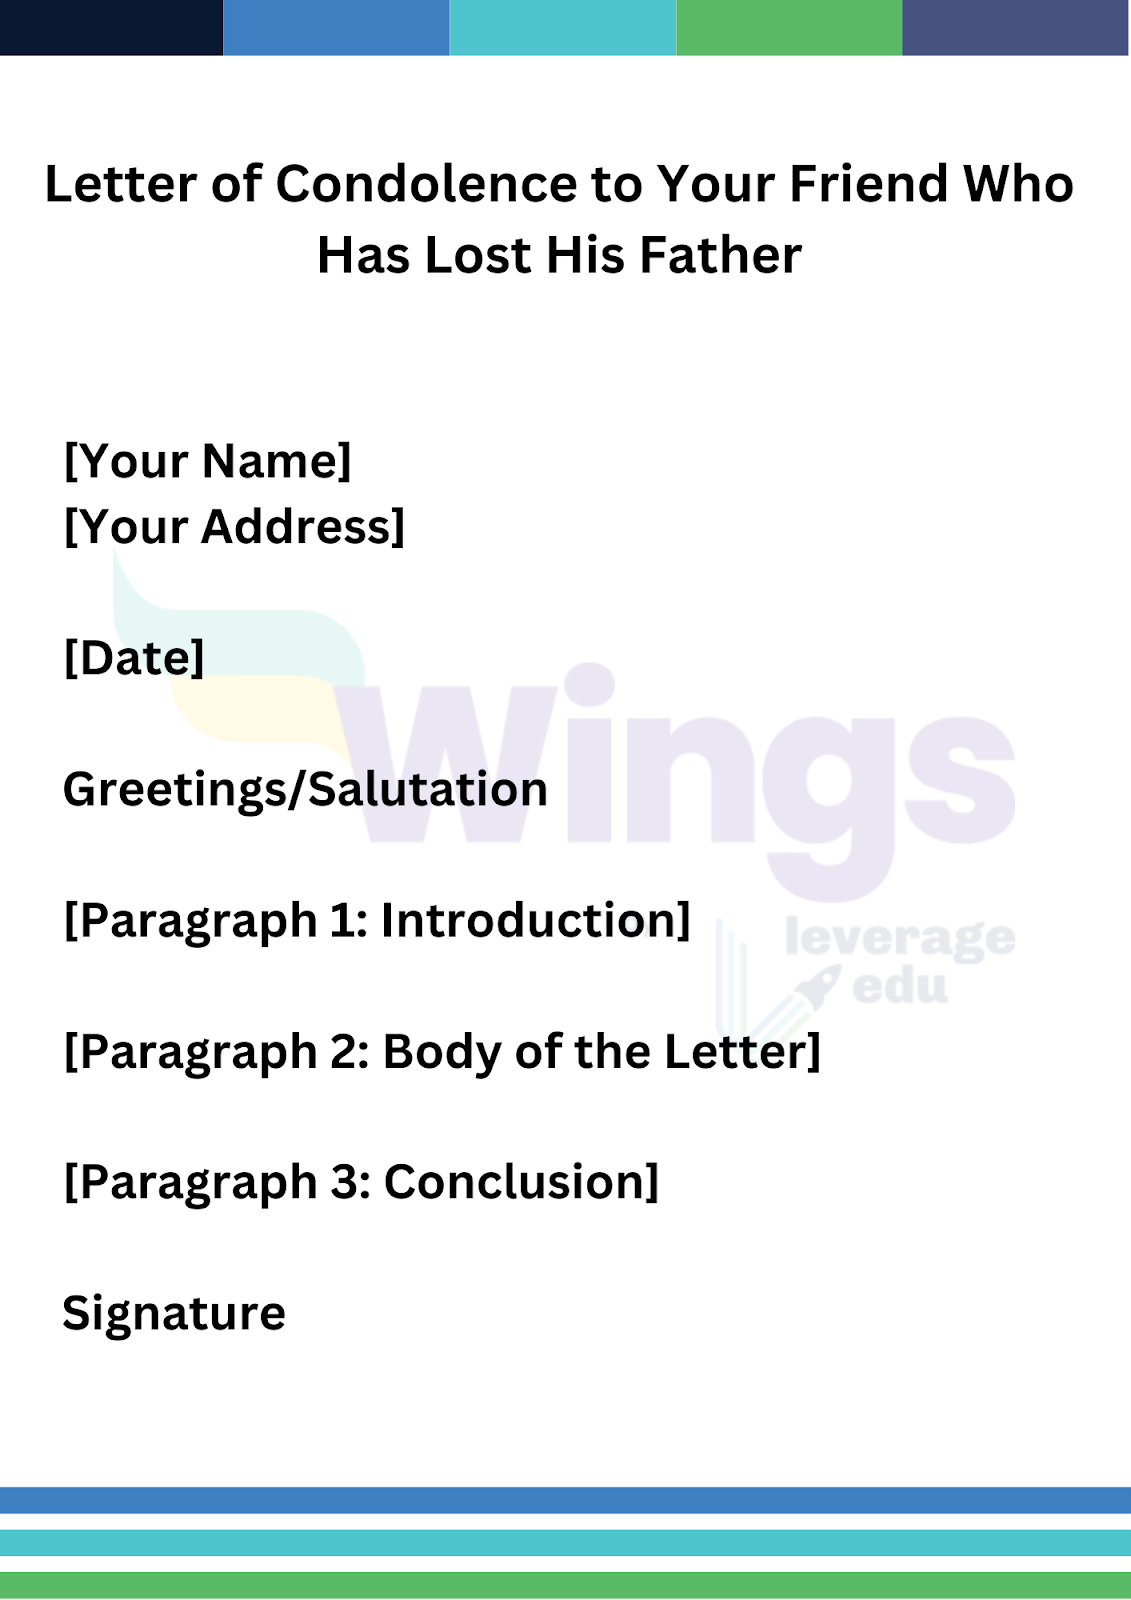 Write a Letter of Condolence to Your Friend Who Has Lost His Father
